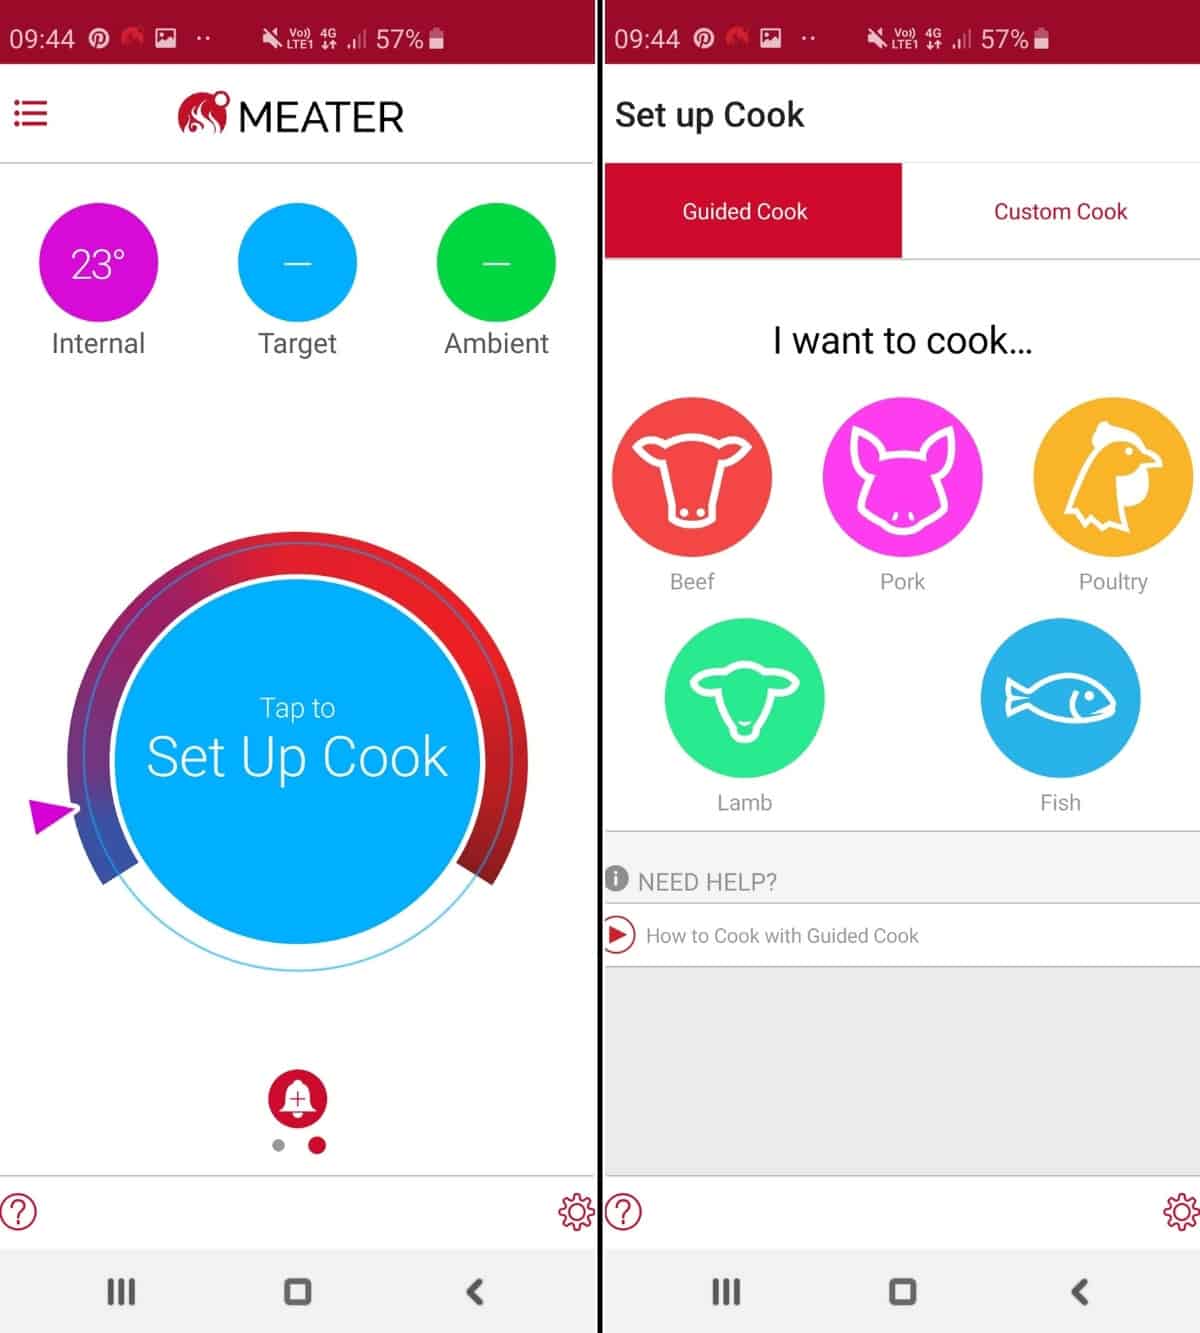 Meater app screenshots showing how to set up a guided cook